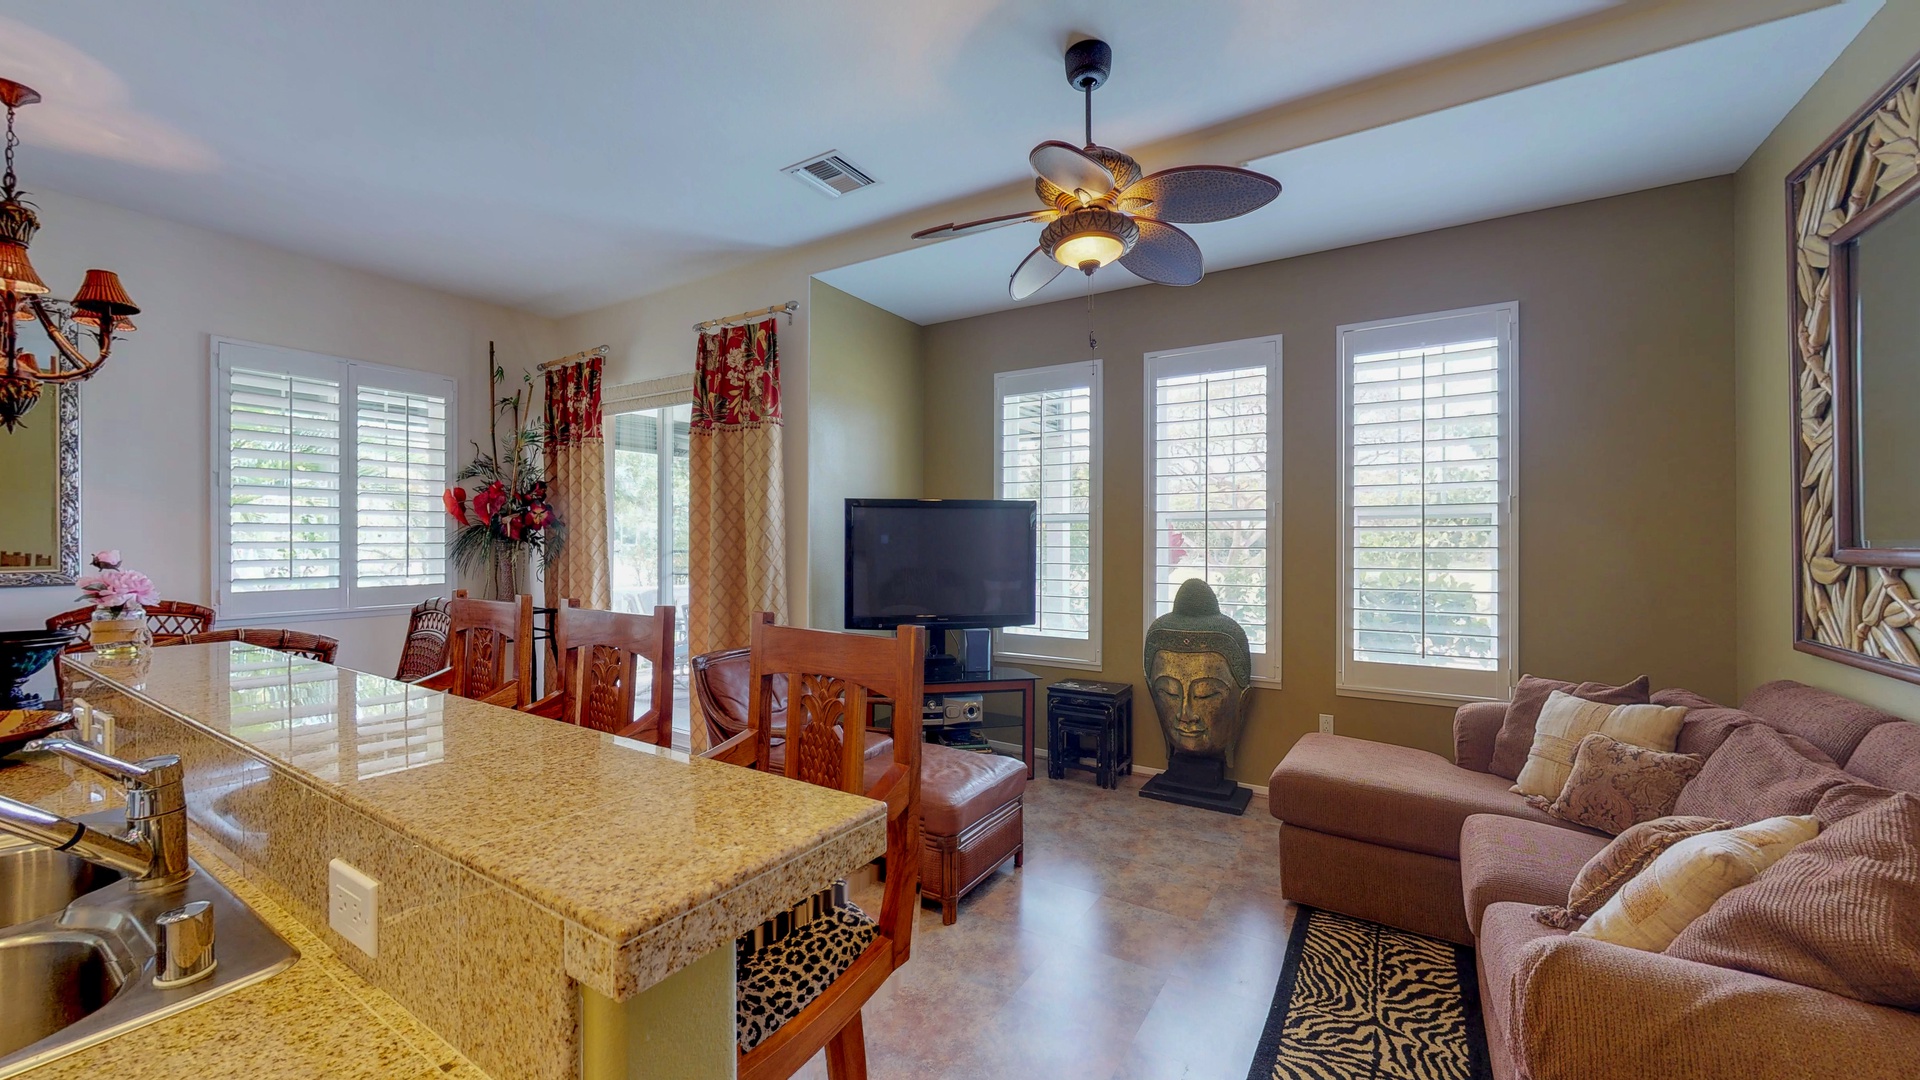 Kapolei Vacation Rentals, Coconut Plantation 1080-1 - Entertain guests with movie night or the scenic view.